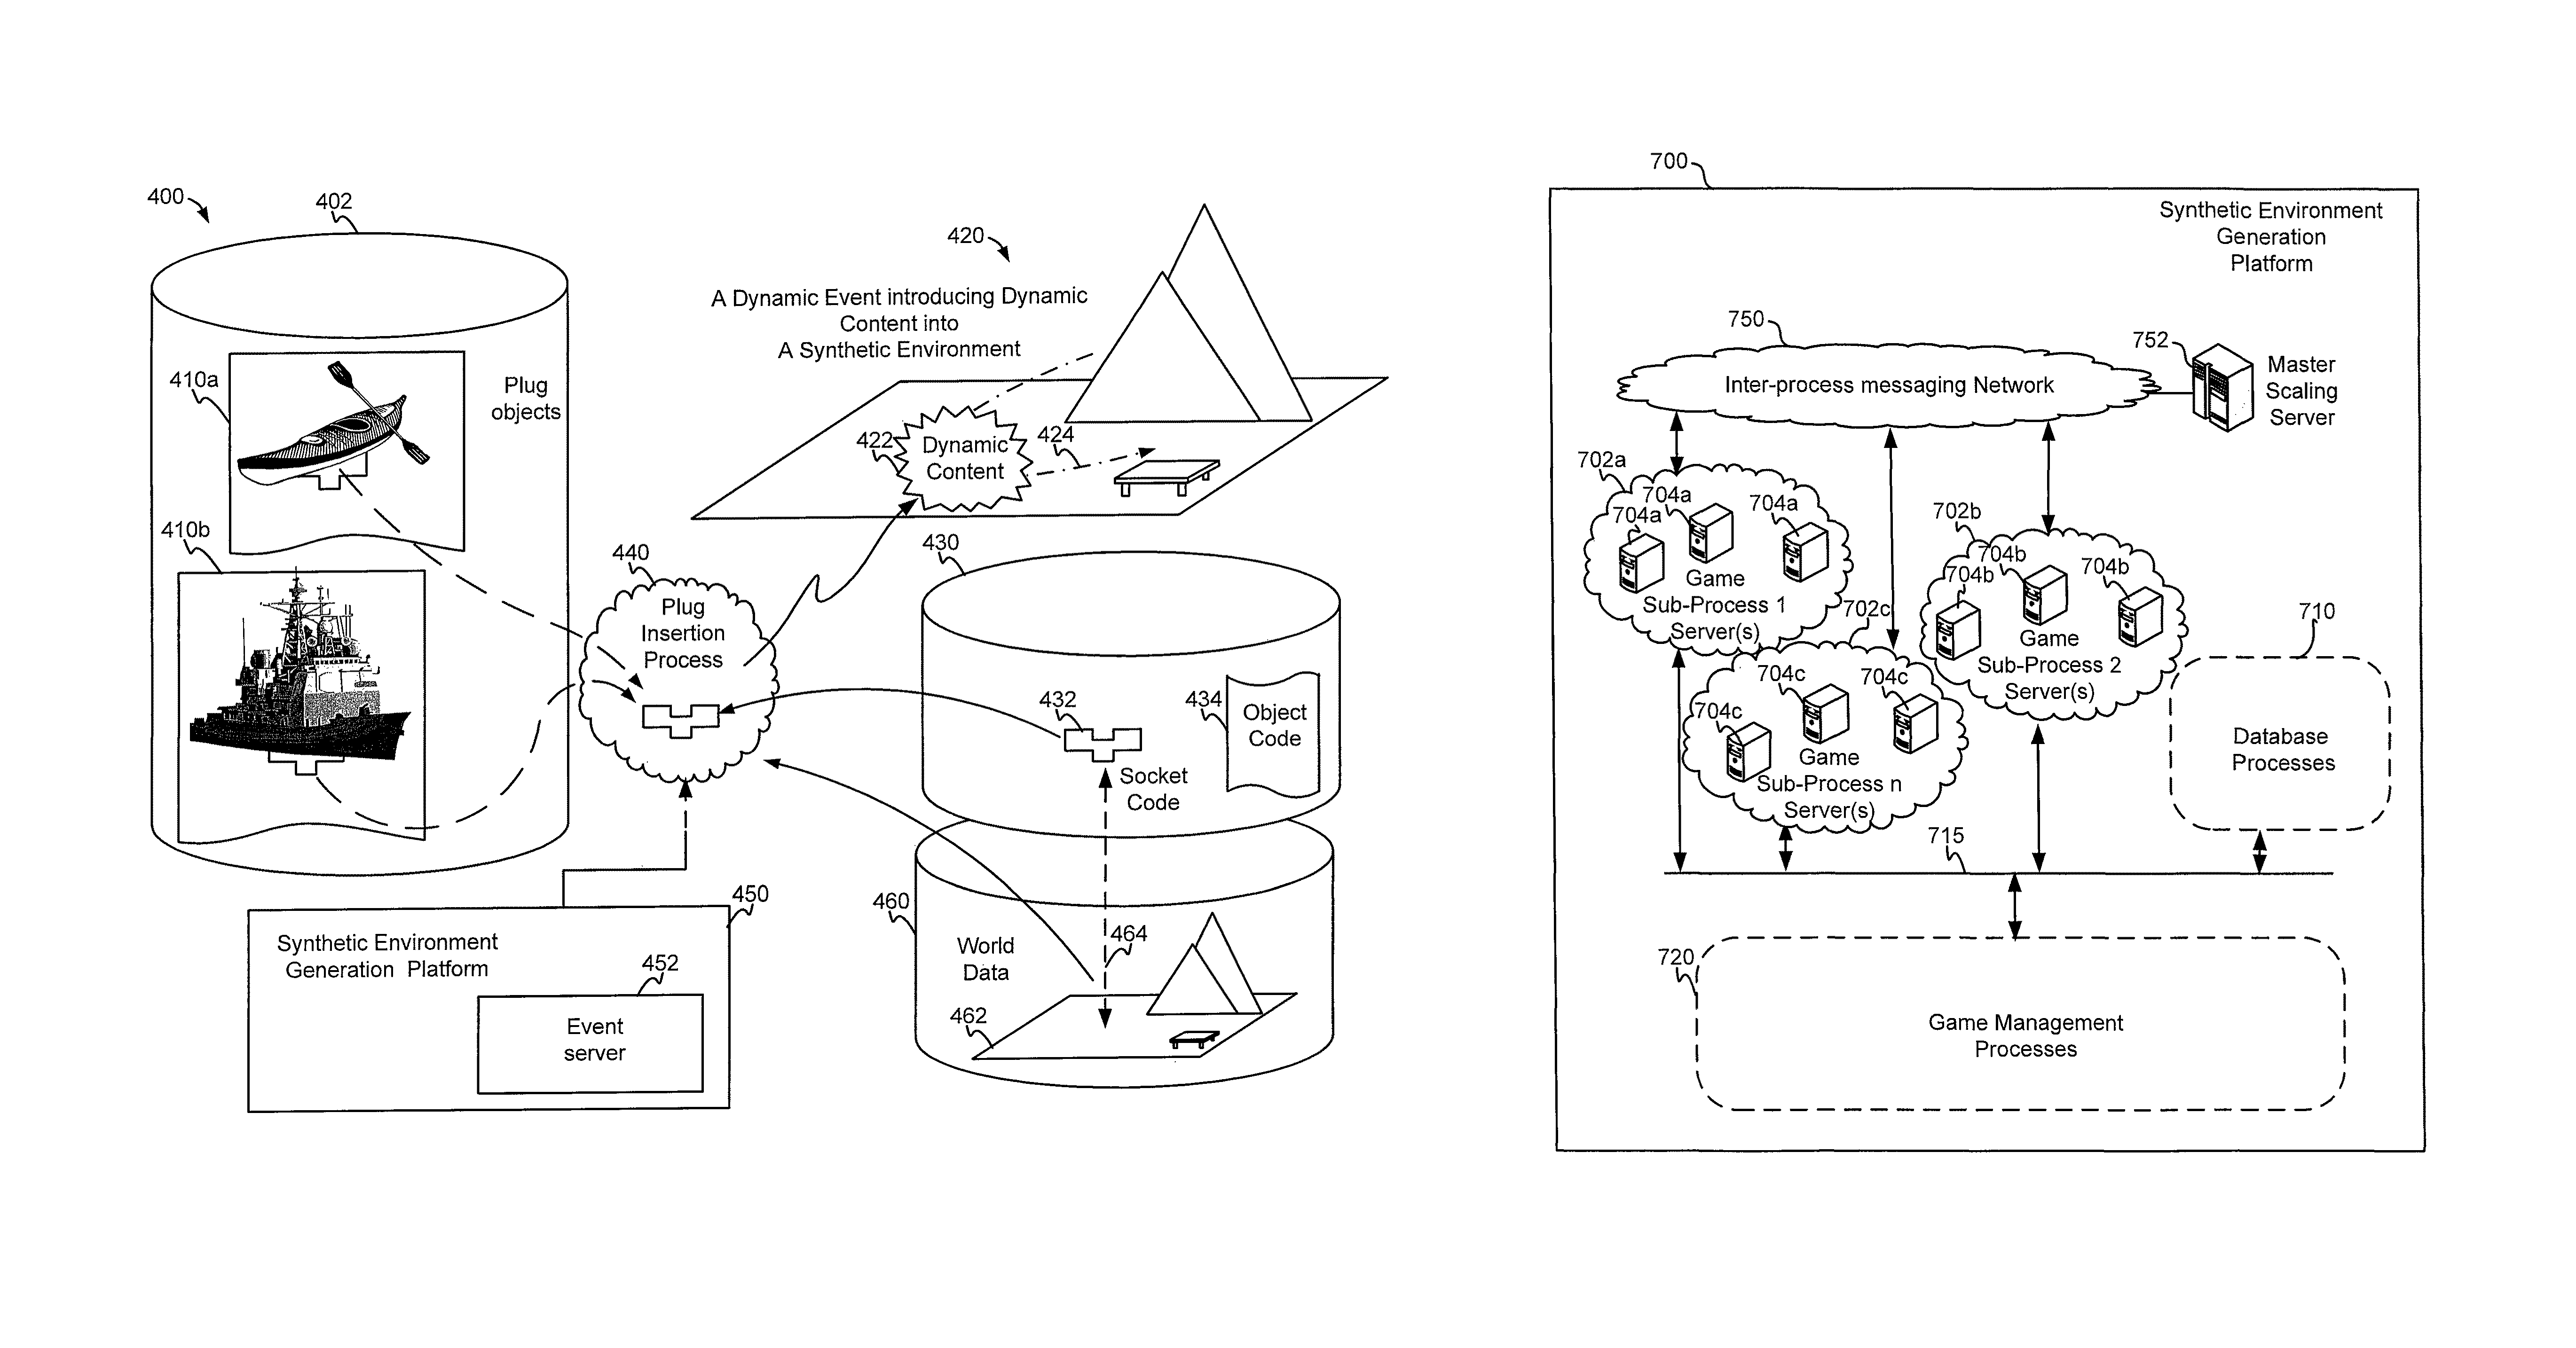 Apparatus, method, and computer readable media to perform transactions in association with participants interacting in a synthetic environment